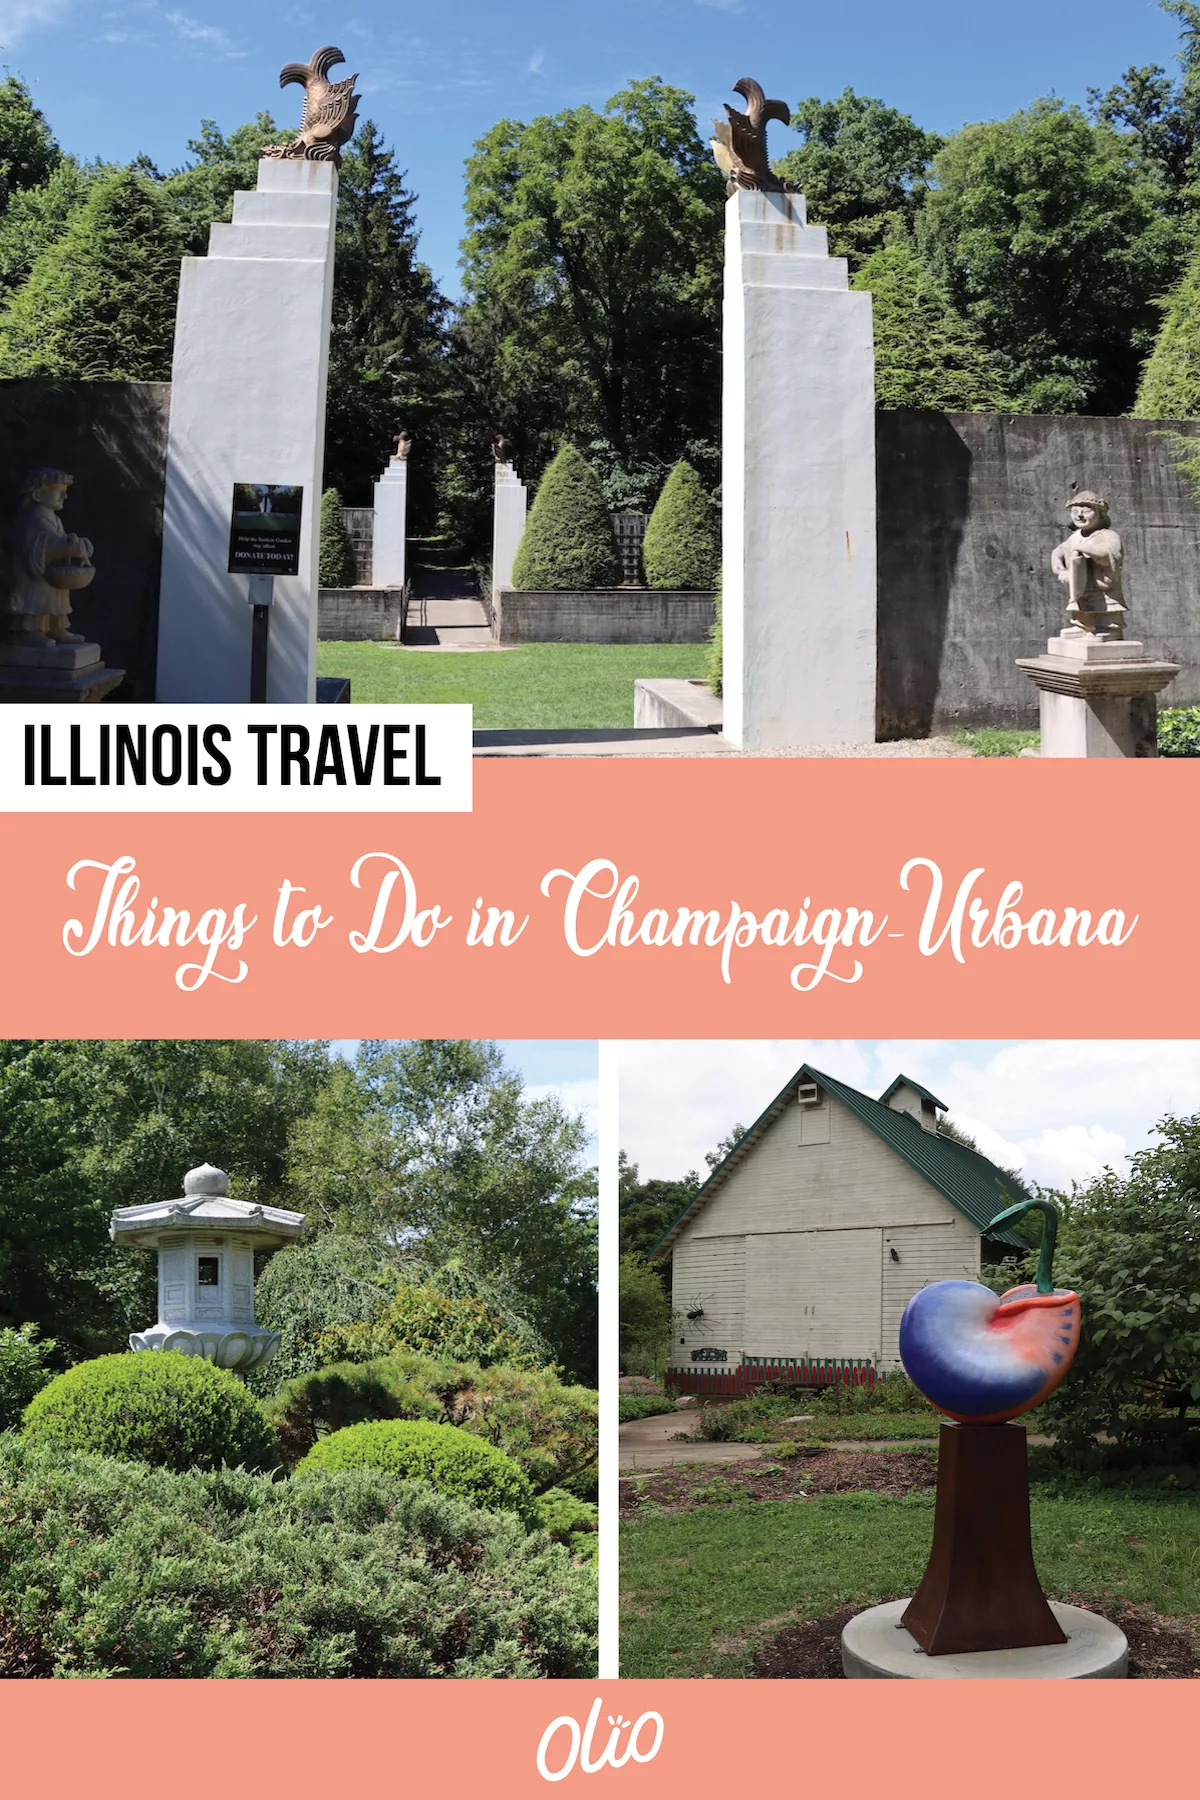 For many Midwesterners, the central part of Illinois is most-often known as the home of the University of Illinois. But there are lots of other things to do in Champaign-Urbana, Illinois. With ample outdoor spaces, delicious dining and creative cultural attractions, this metro area is full of potential adventures, no matter the season. Get your steps in, appreciate some museum-worthy art and maybe even be inspired to create something of your own.